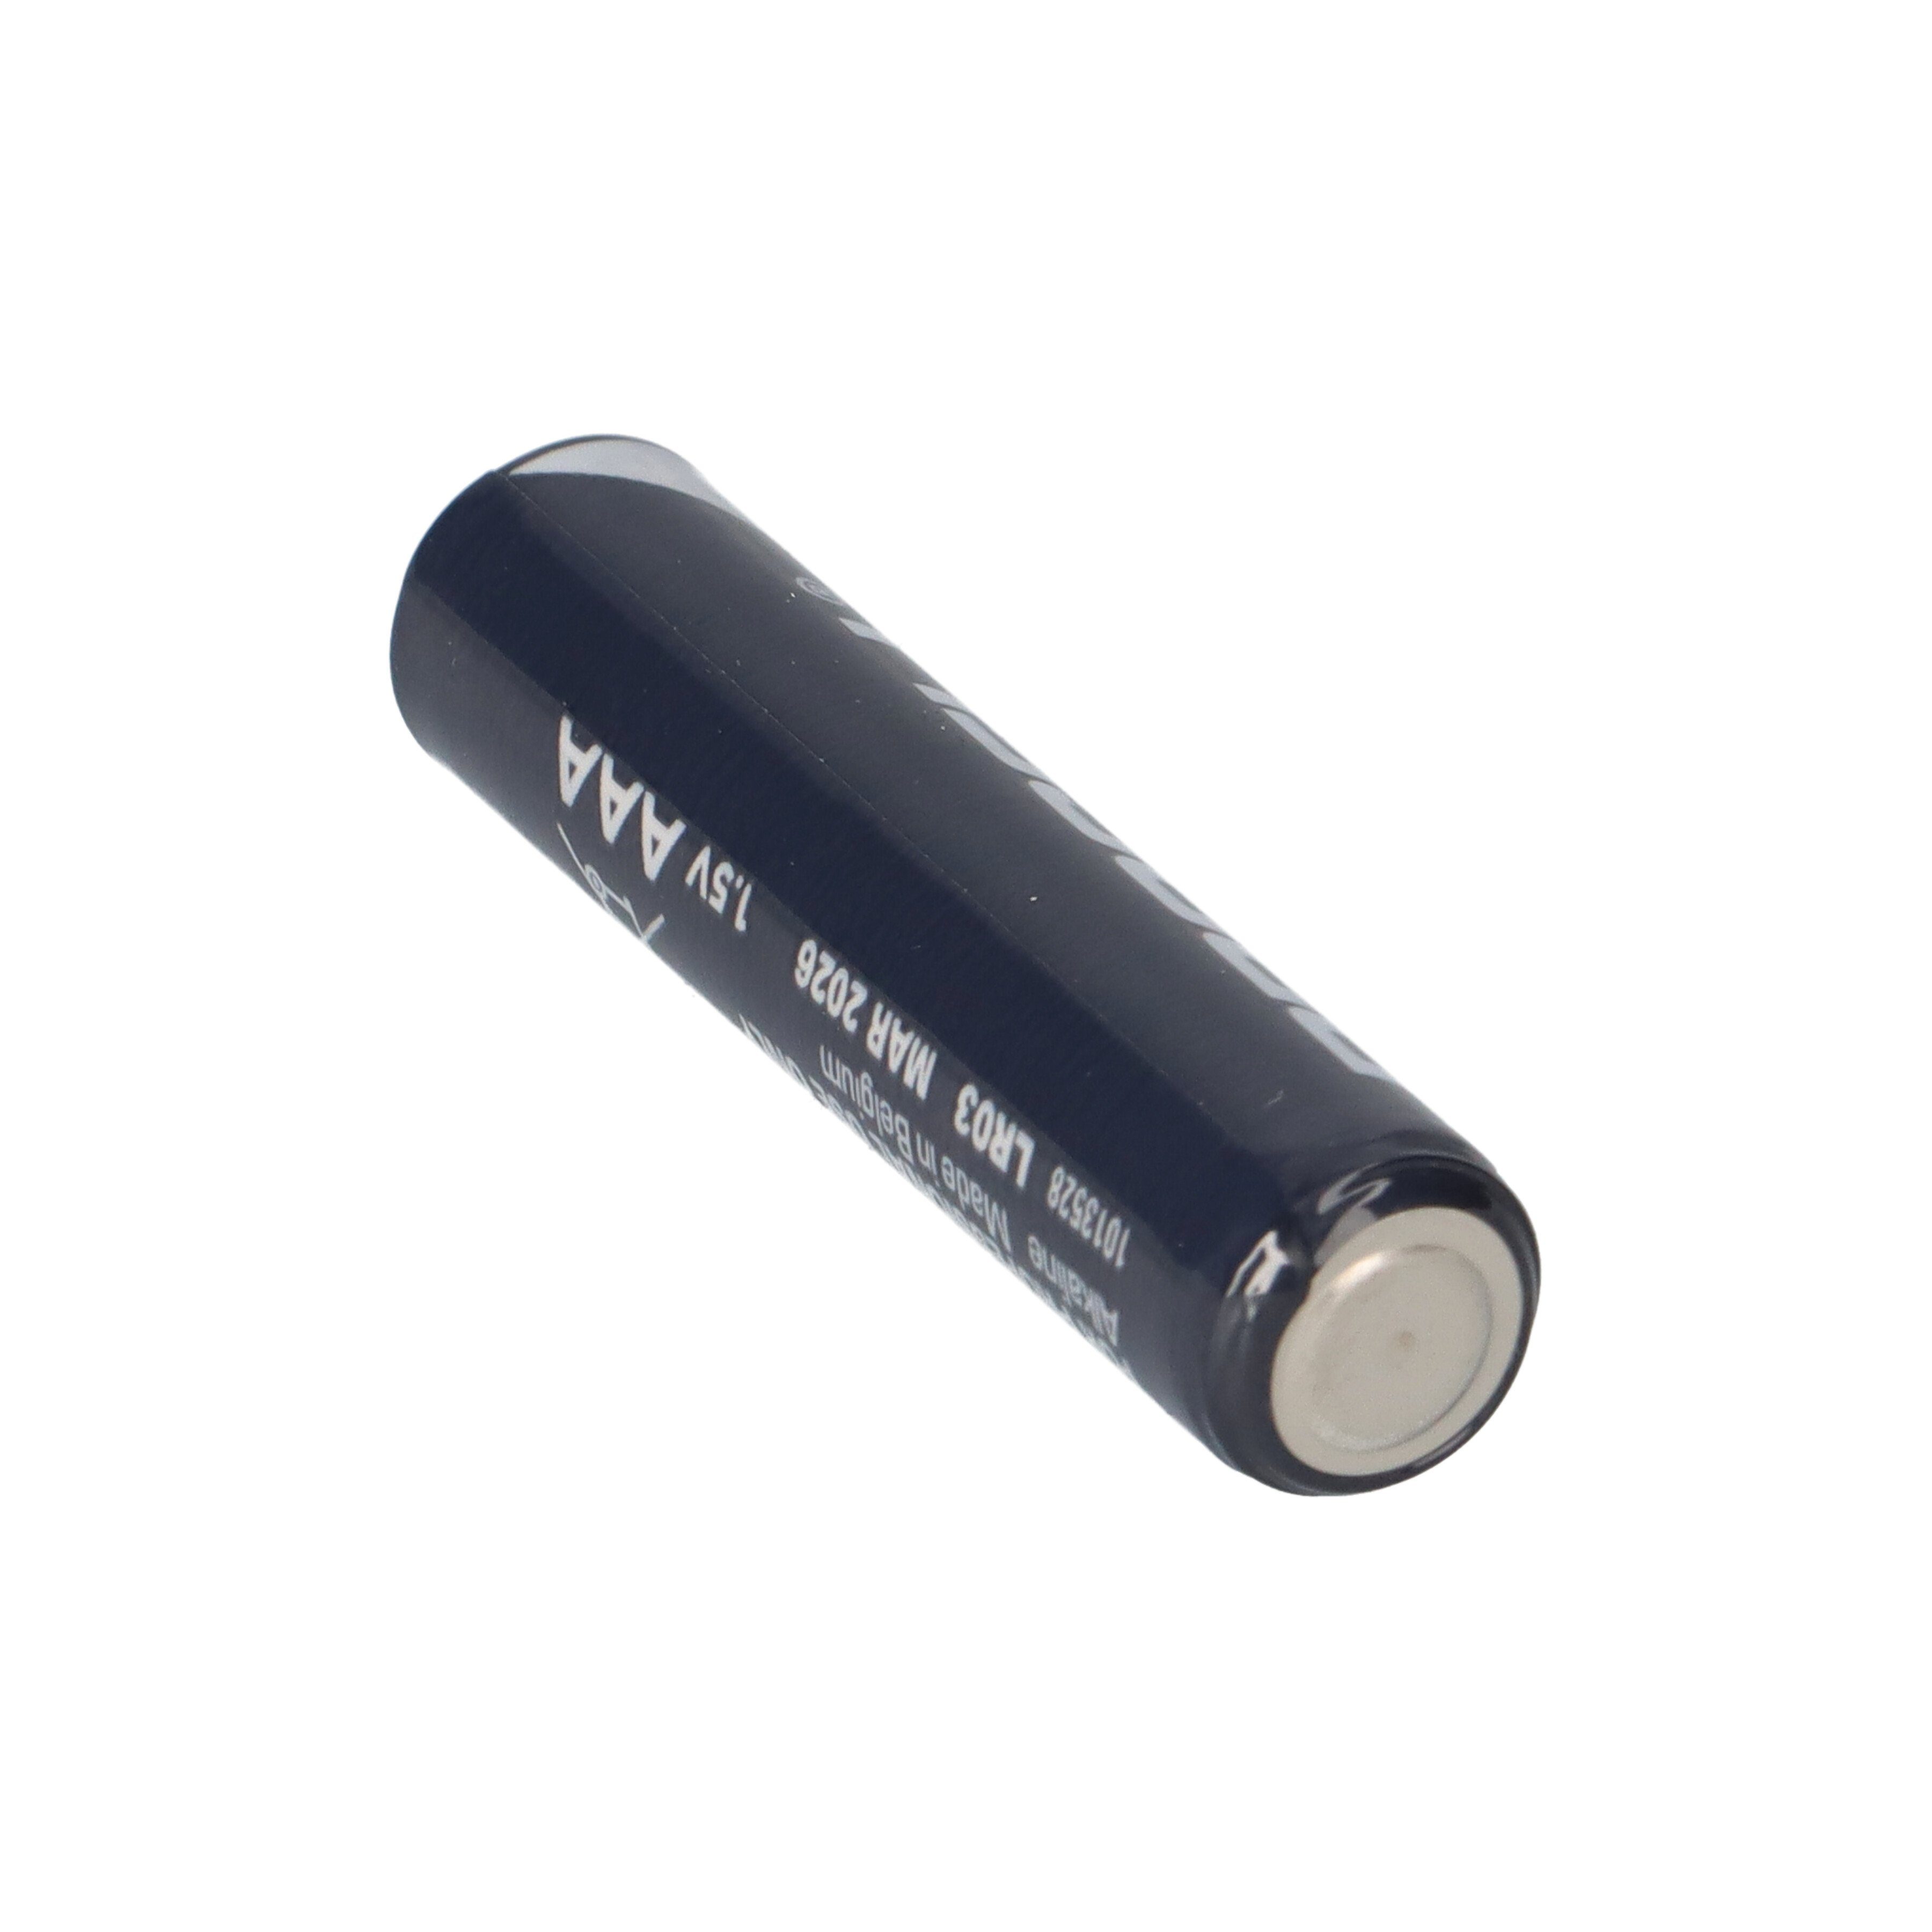 AAA Batterie Duracell Procell Micro 50x Batterie MN2400